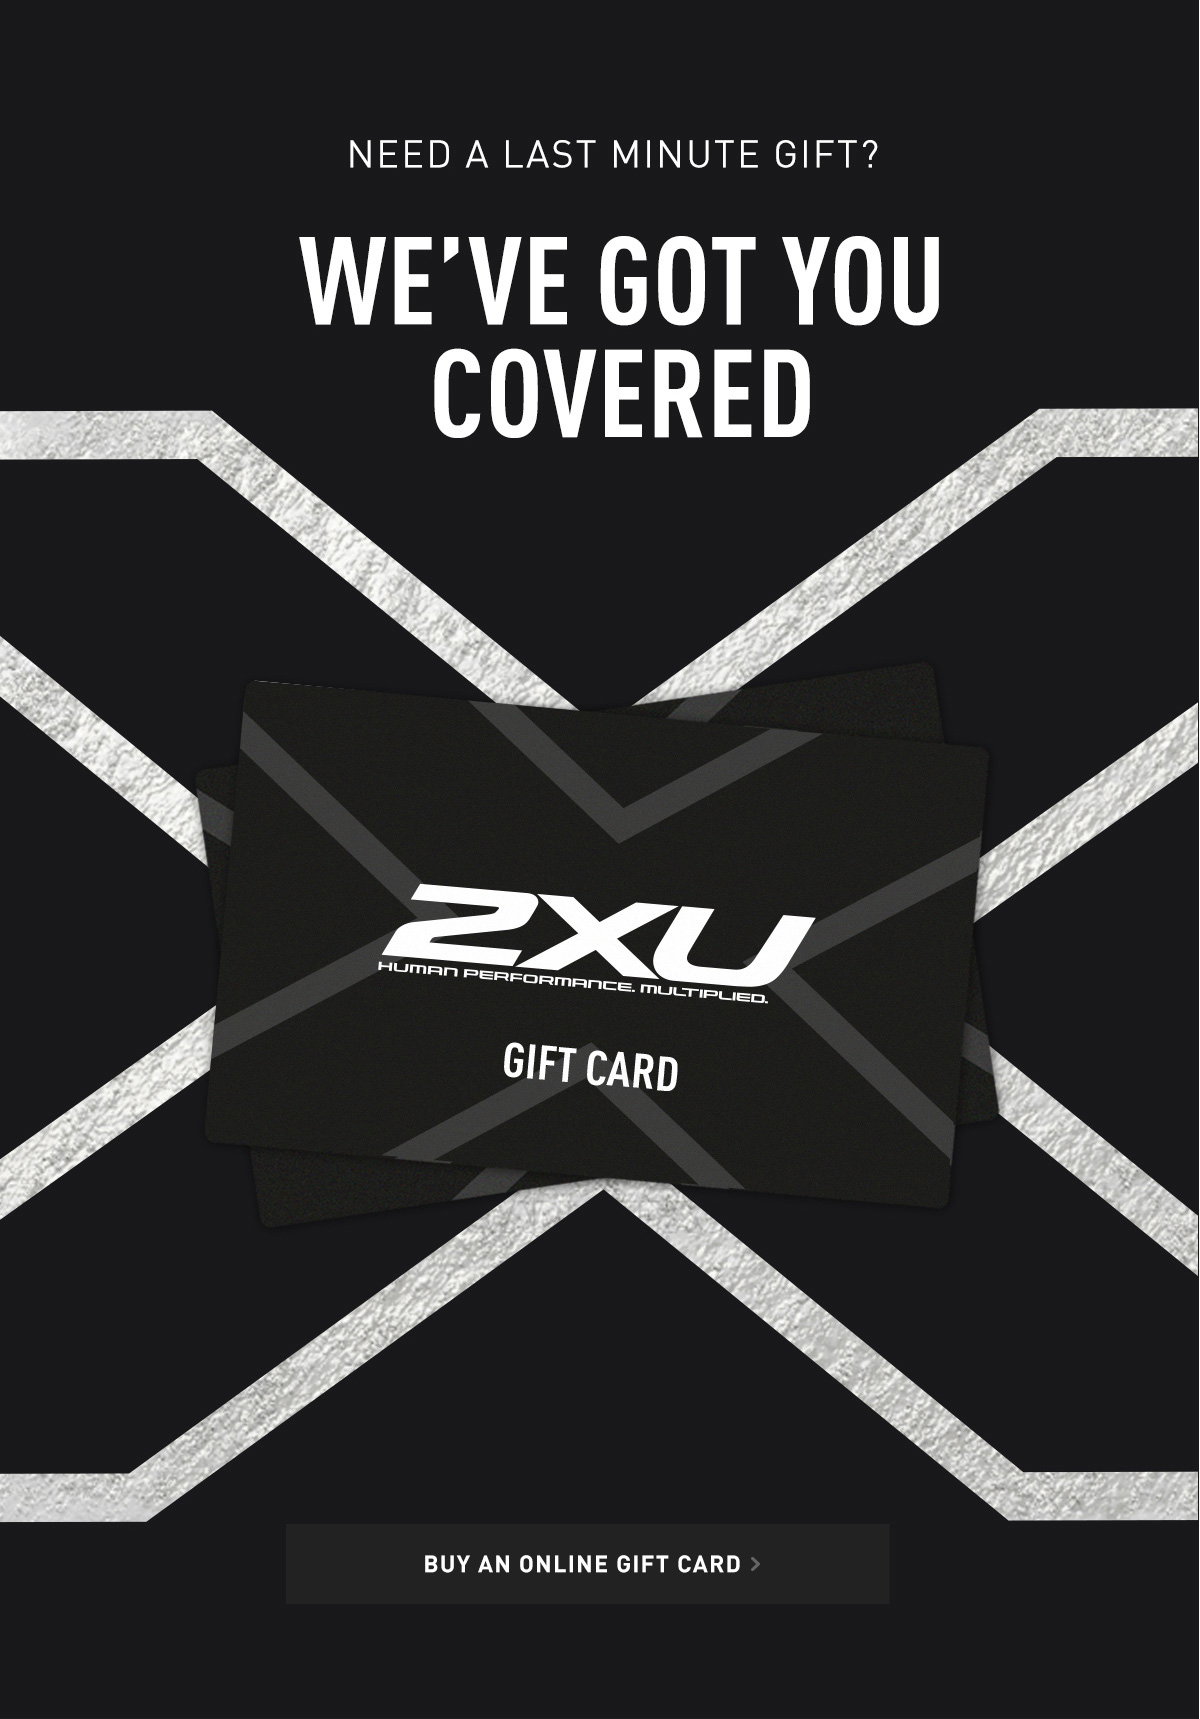 Last Holiday Gift? 2XU X-Cards Available | Milled